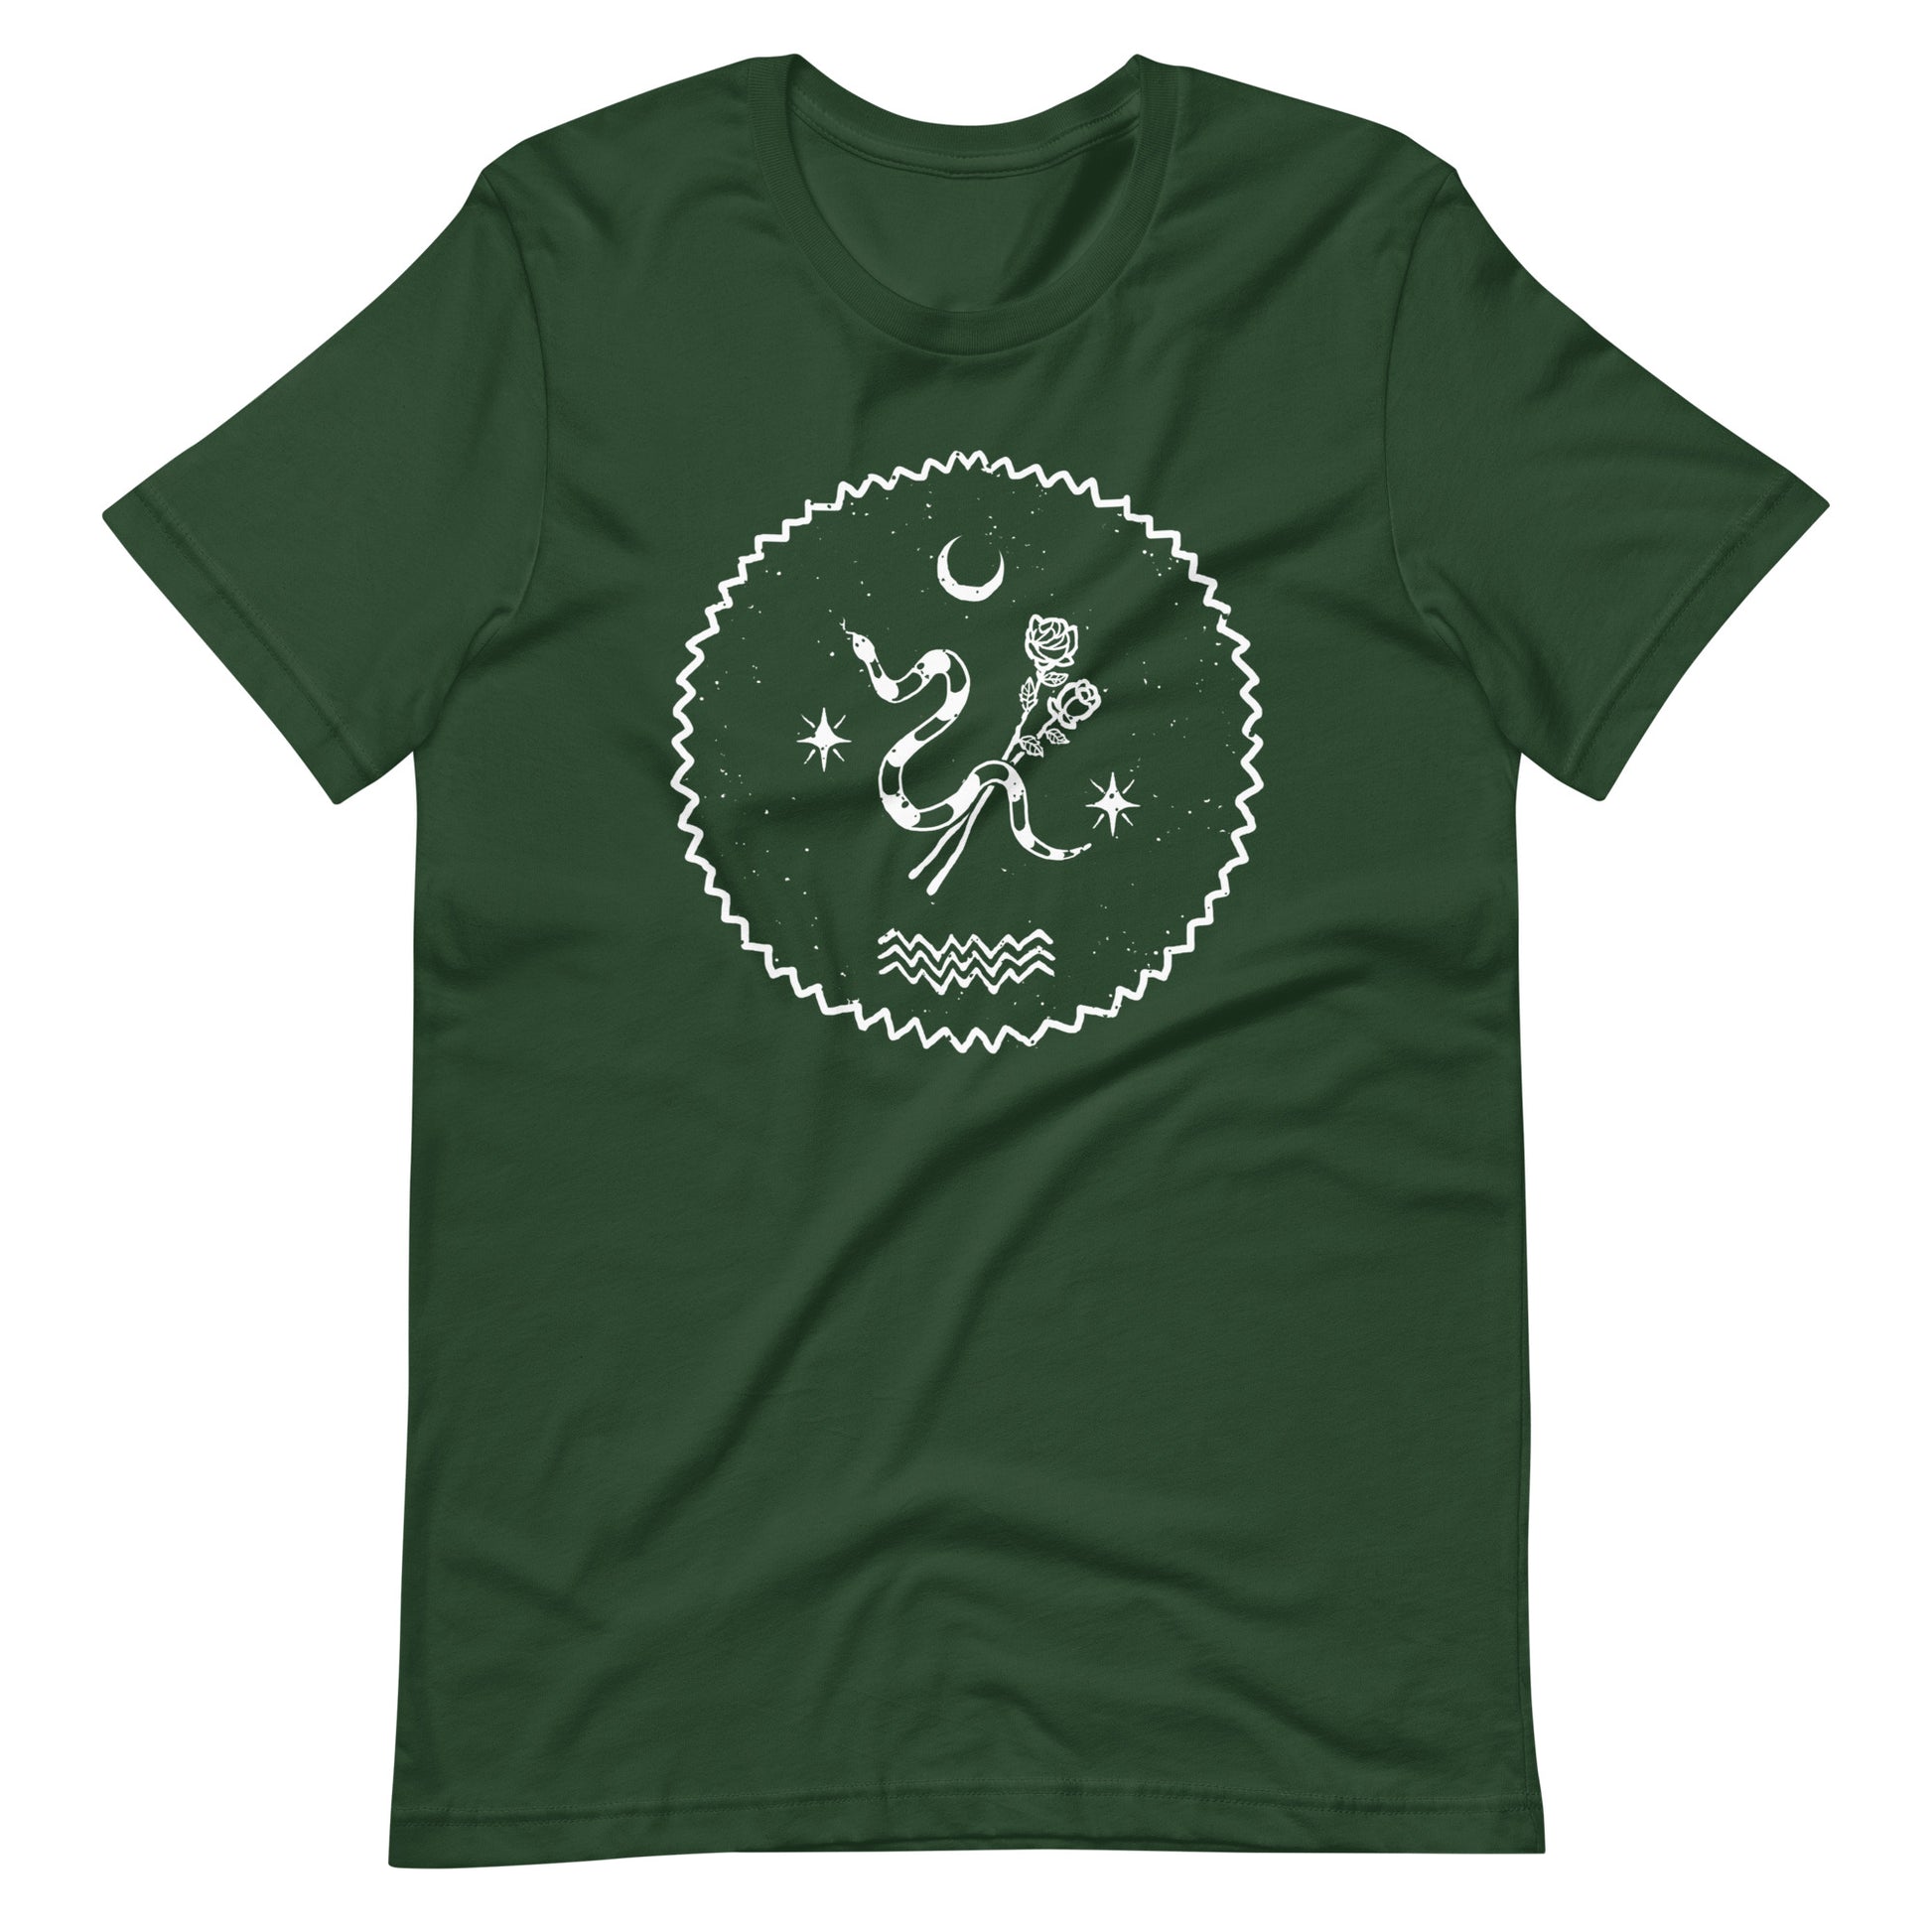 Scented Poison - Men's t-shirt - Forest Front